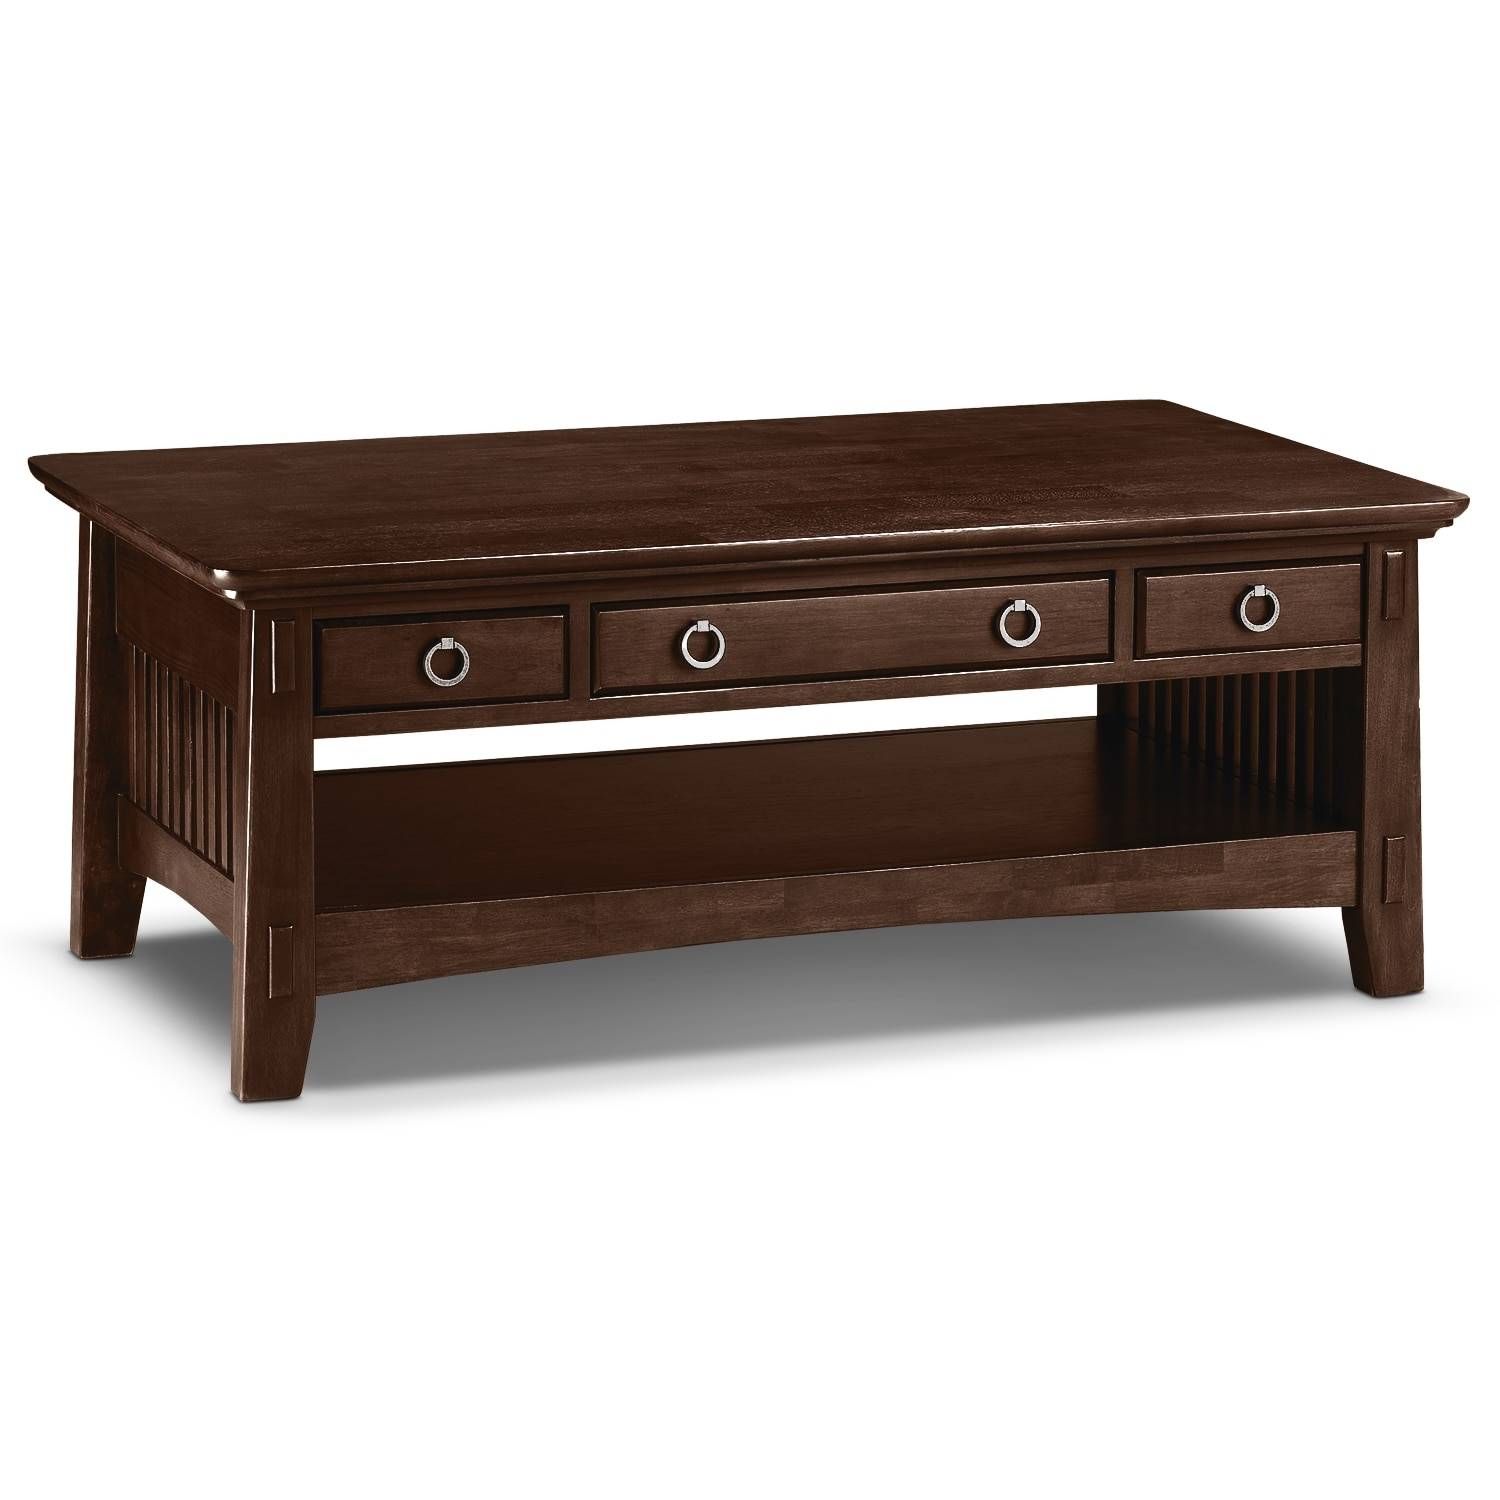 Coffee Tables | American Signature Furniture In Aiden Coffee Tables (View 28 of 30)